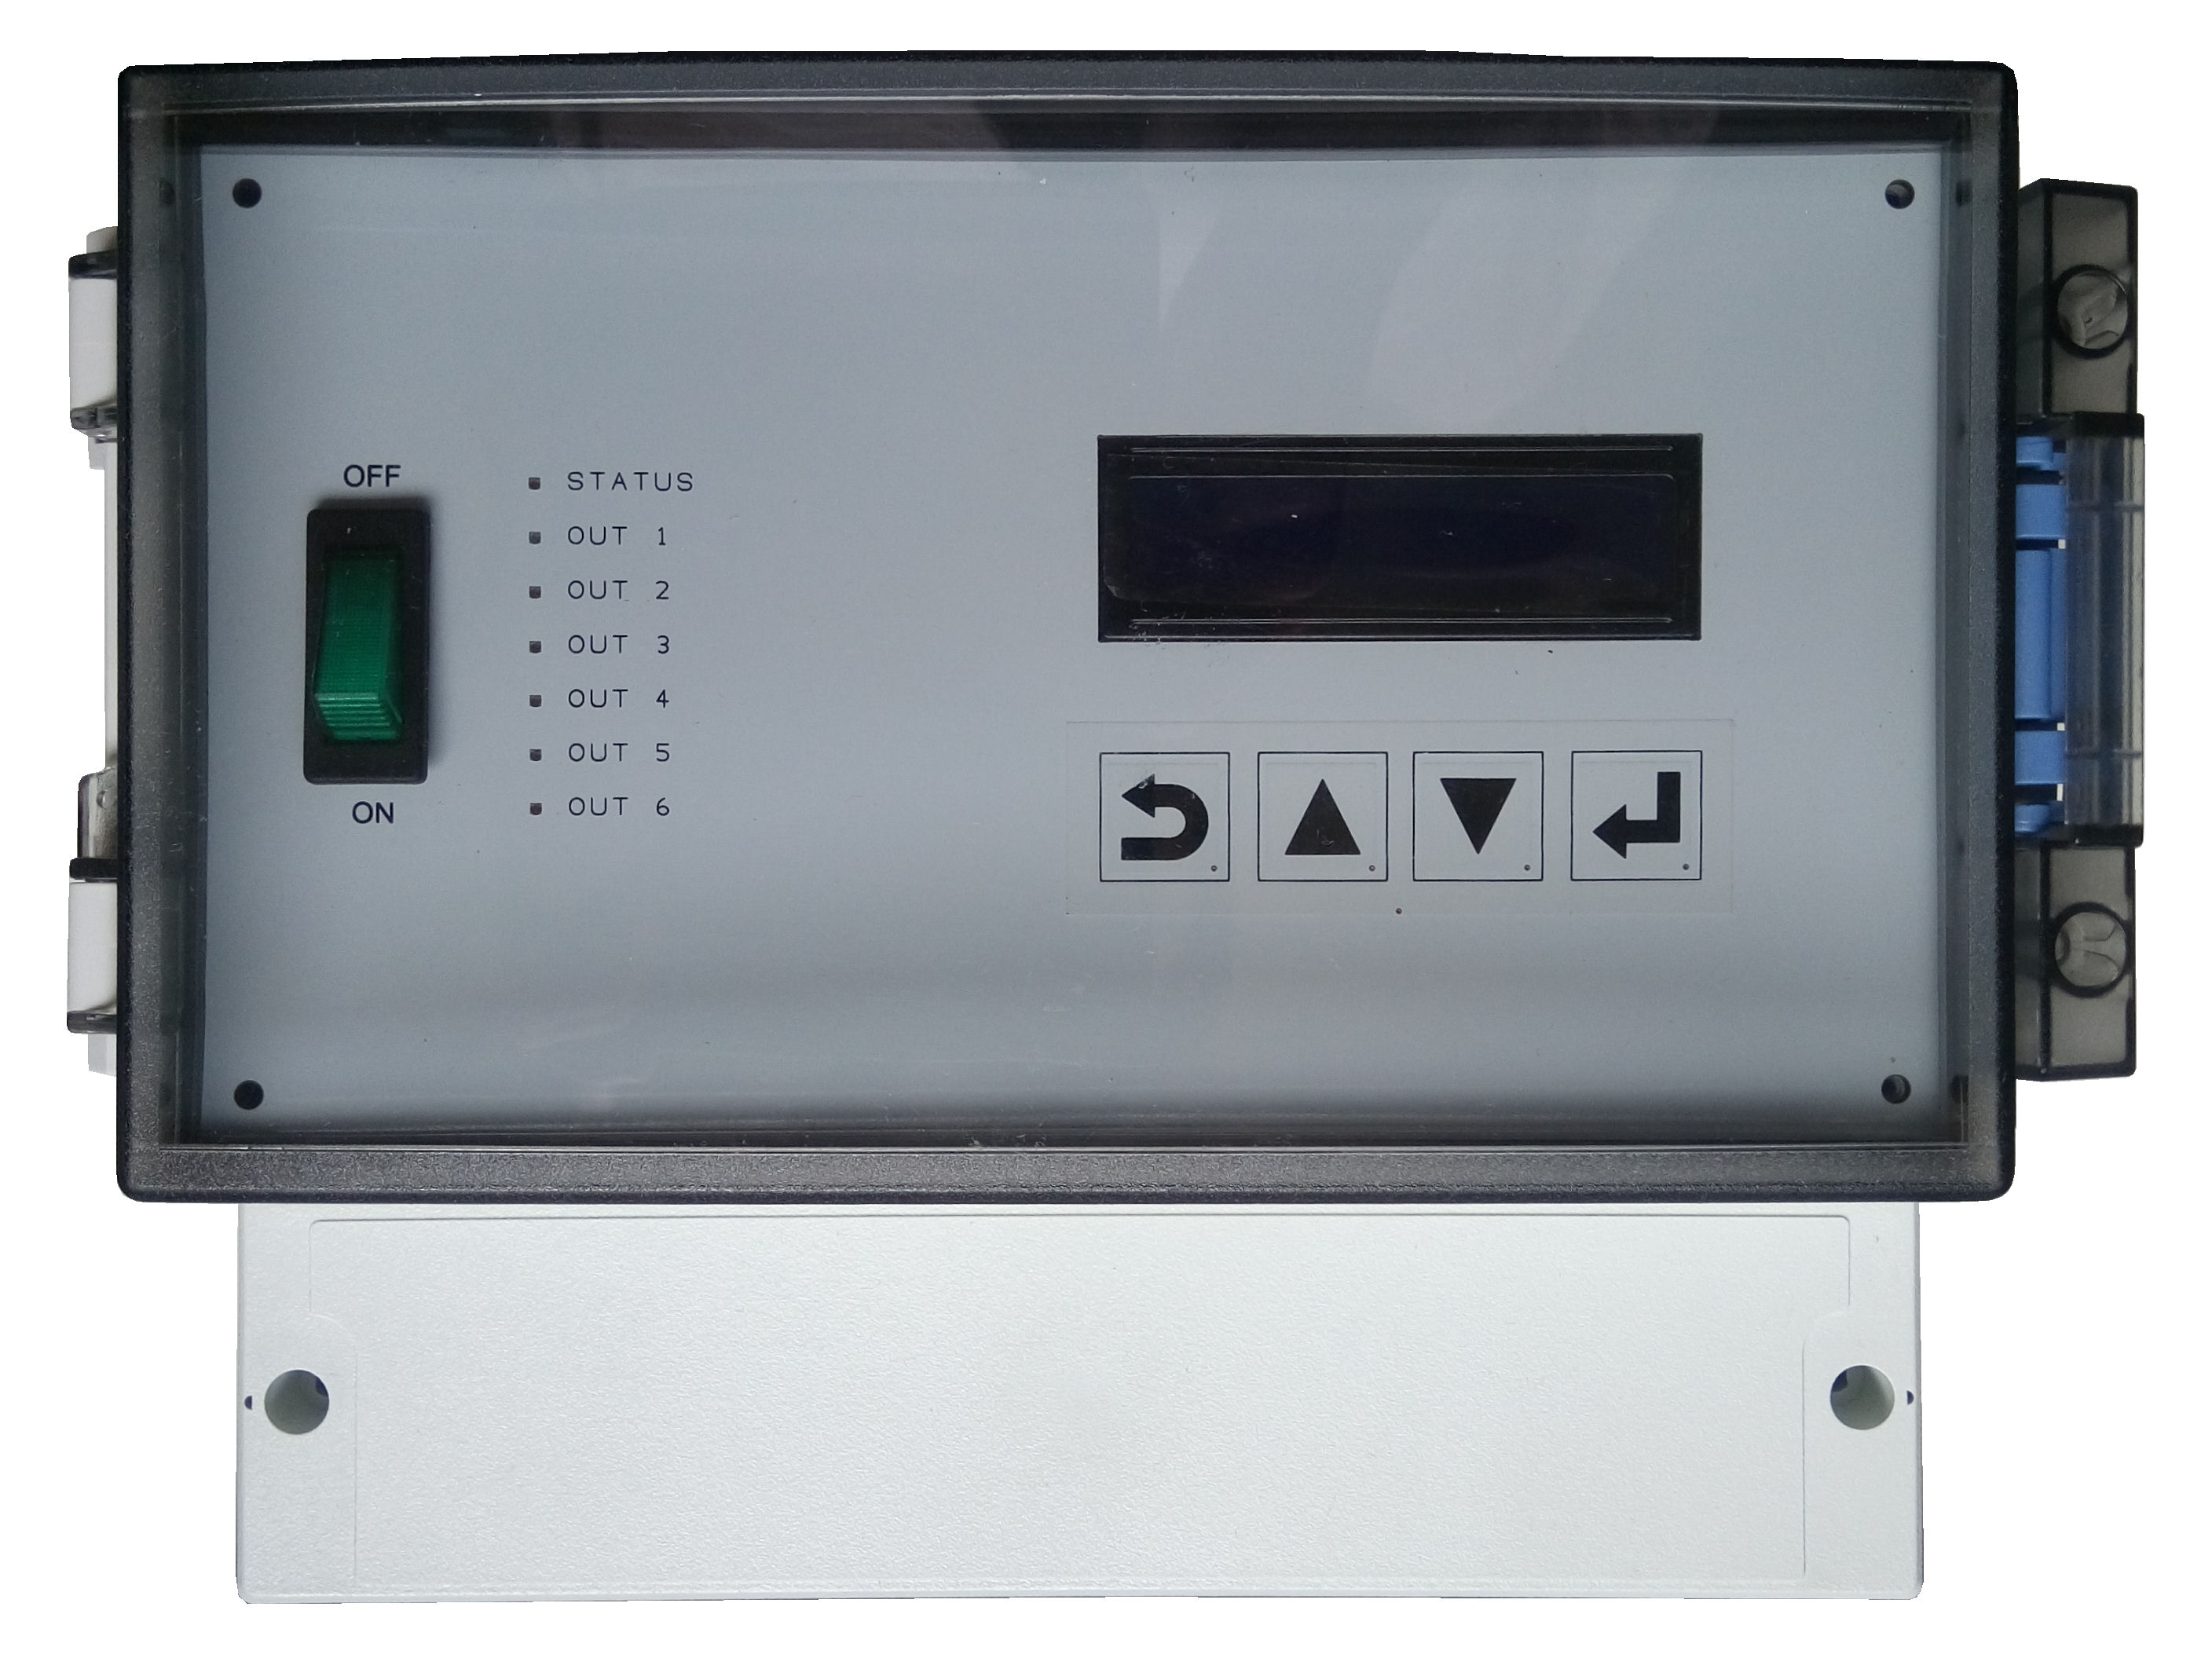 electronic control system with touch panel buttons to control